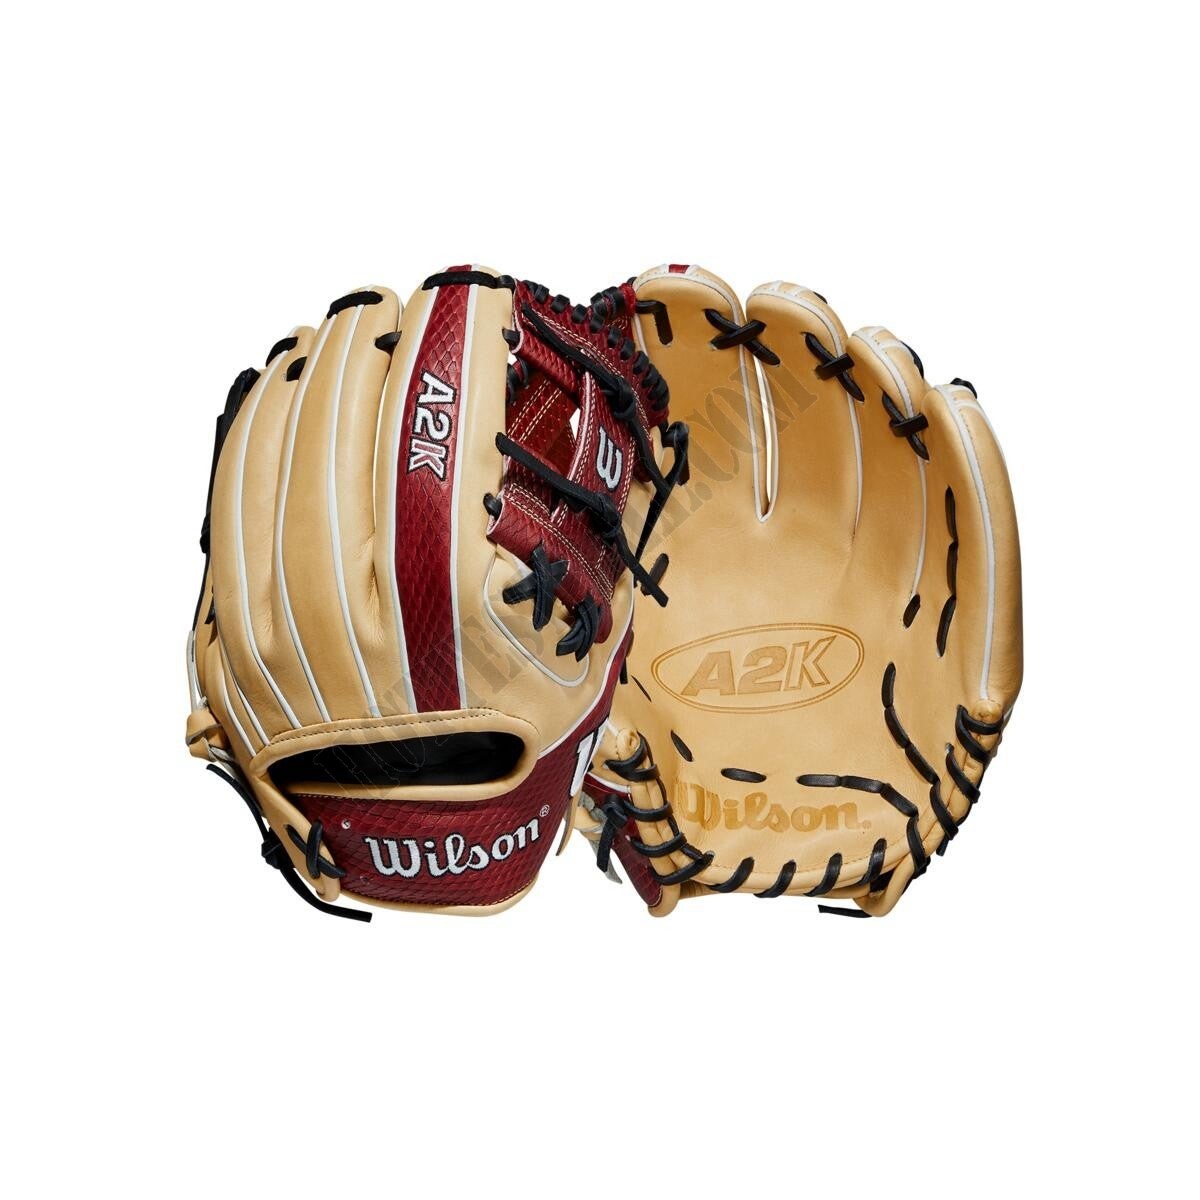 2021 A2K 1786 11.5" Infield Baseball Glove - Limited Edition ● Wilson Promotions - -0